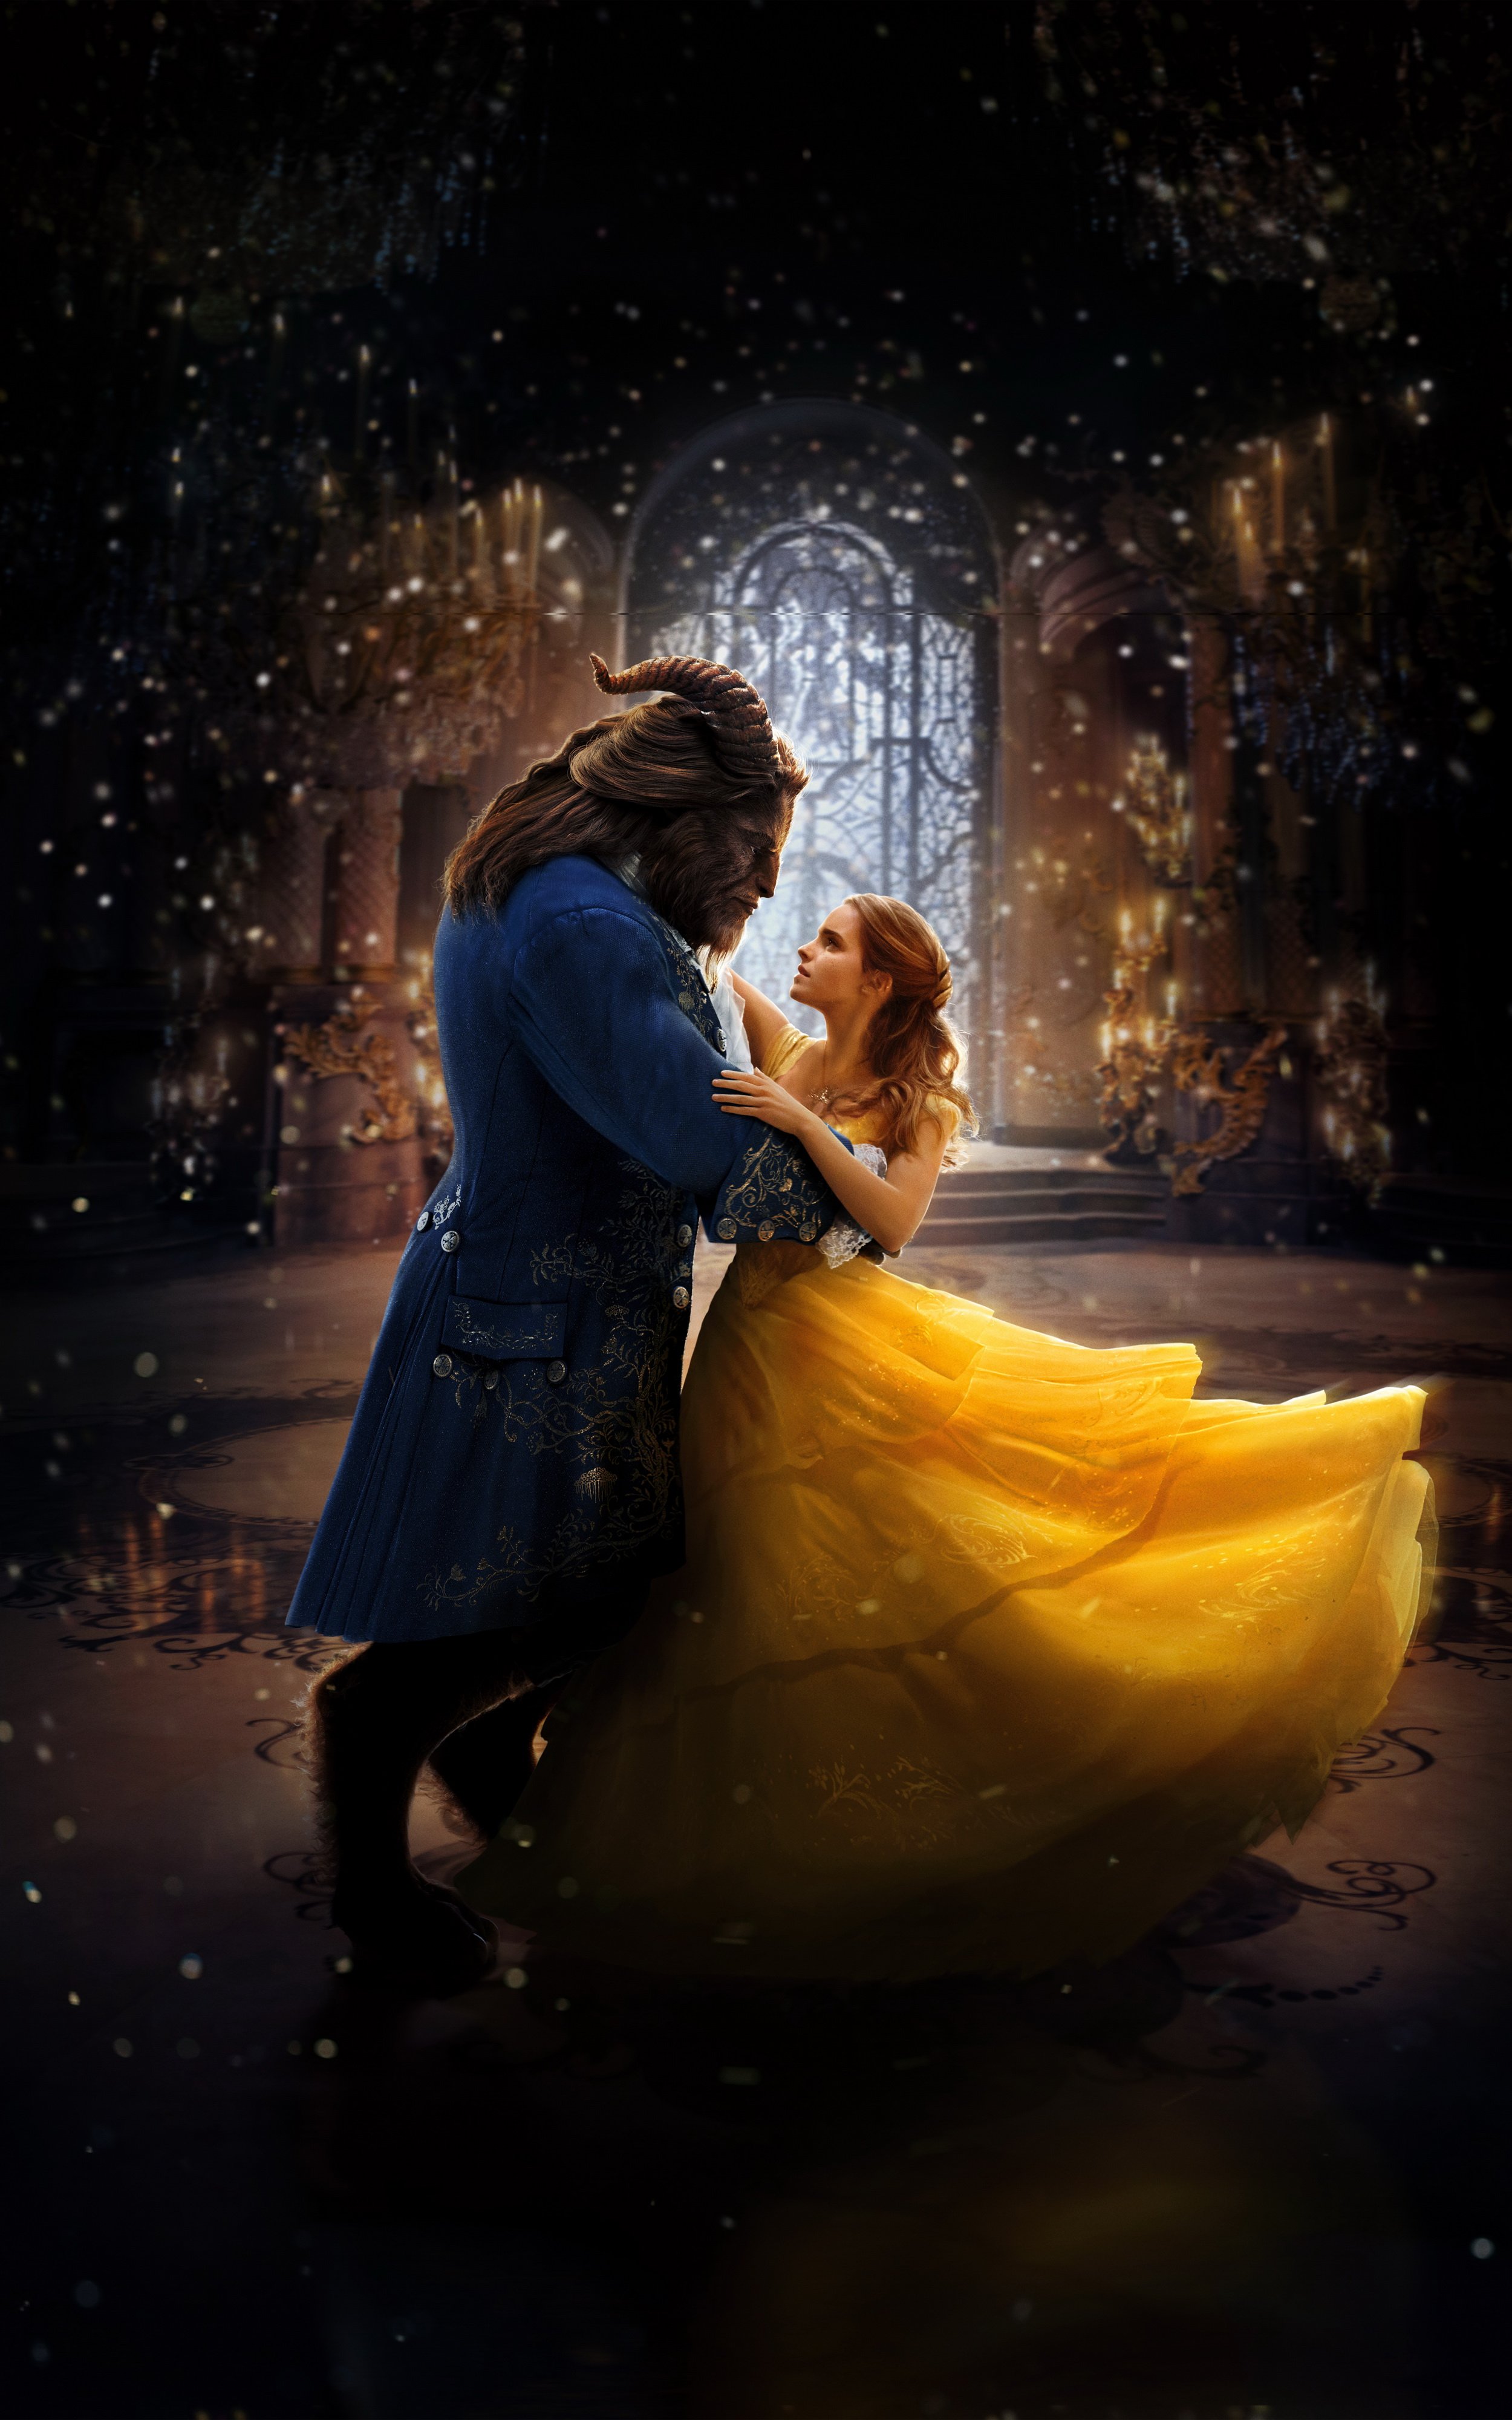 Mobile Wallpaper 105 Disney's Beauty and the Beast 11 variations